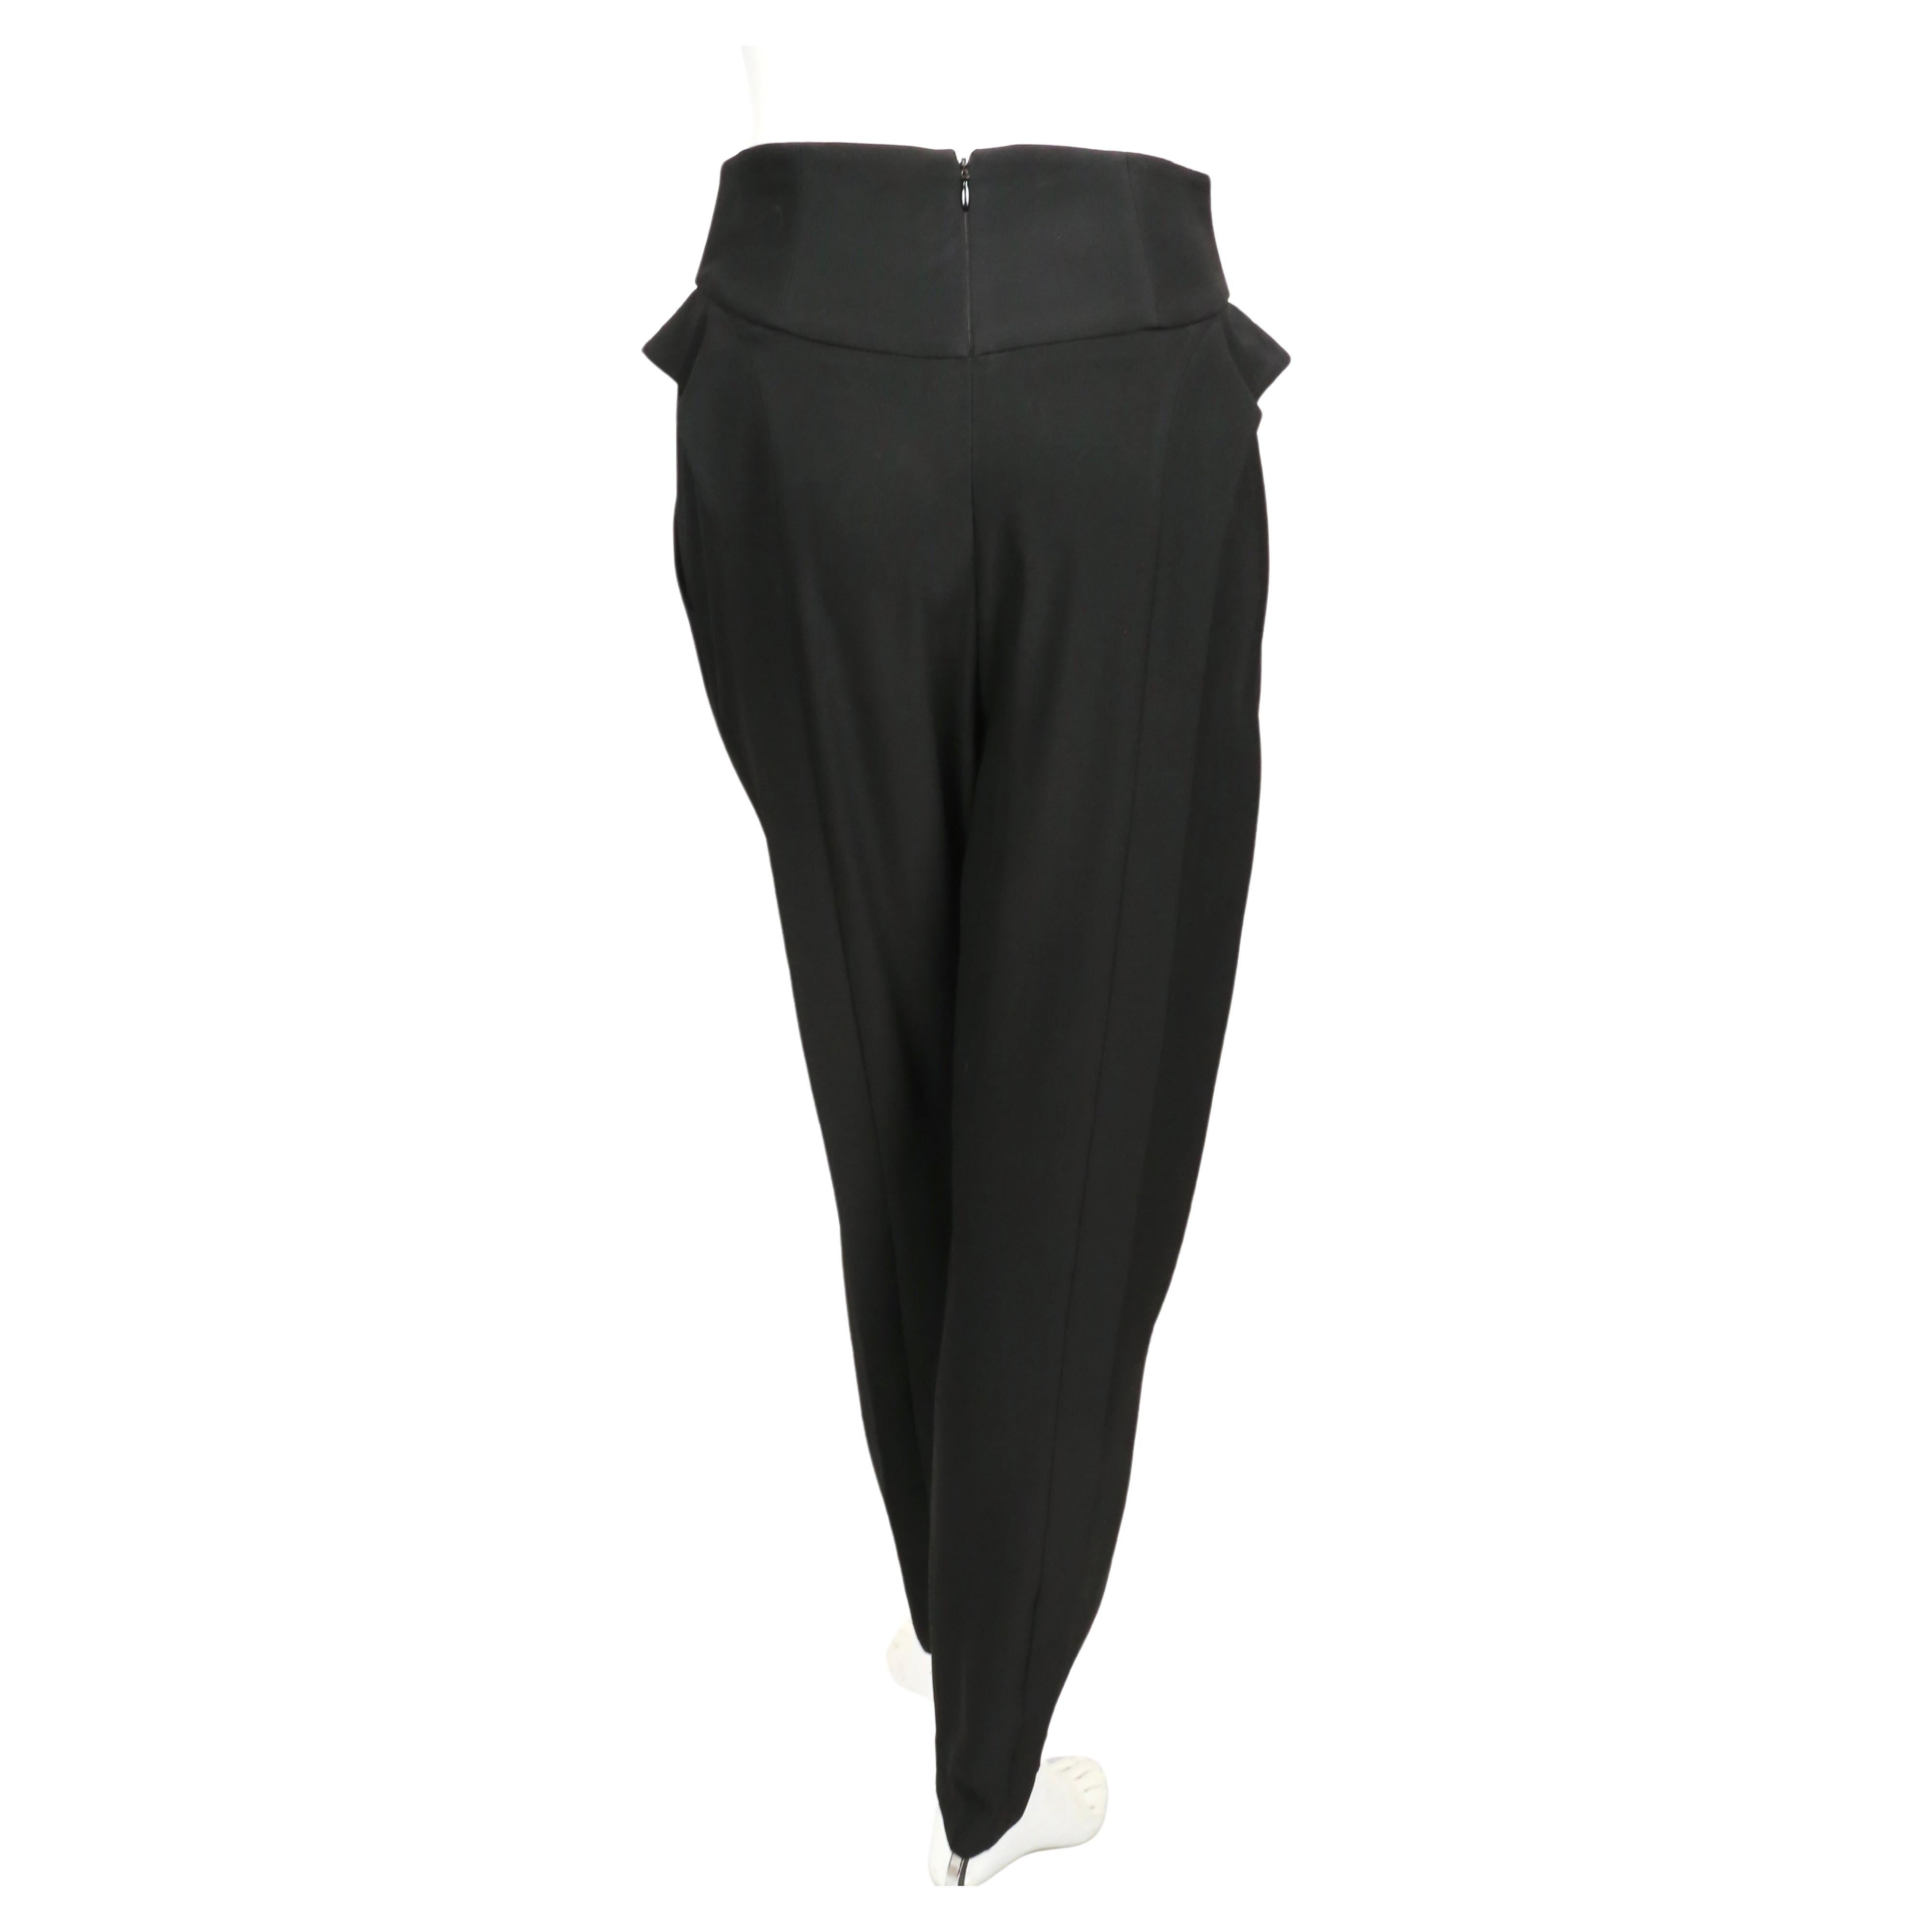 2000's ALEXANDER MCQUEEN black pants with side ruffles For Sale 3